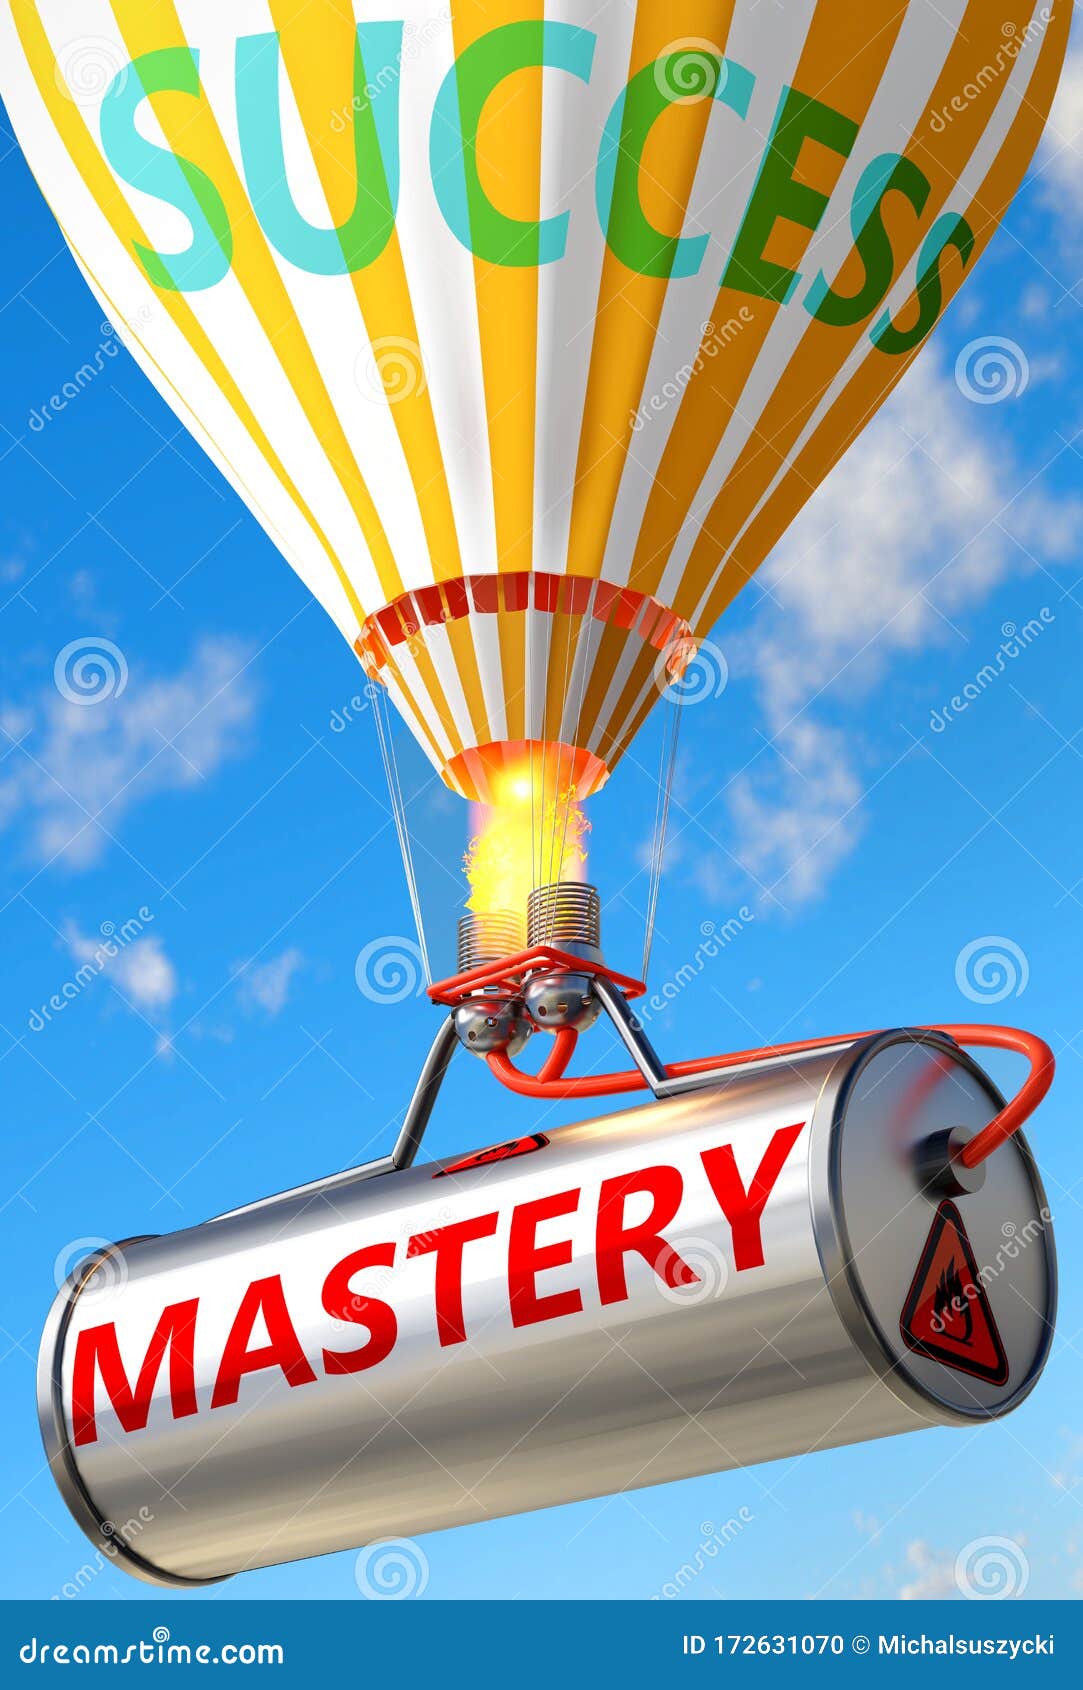 mastery and success - pictured as word mastery and a balloon, to ize that mastery can help achieving success and prosperity